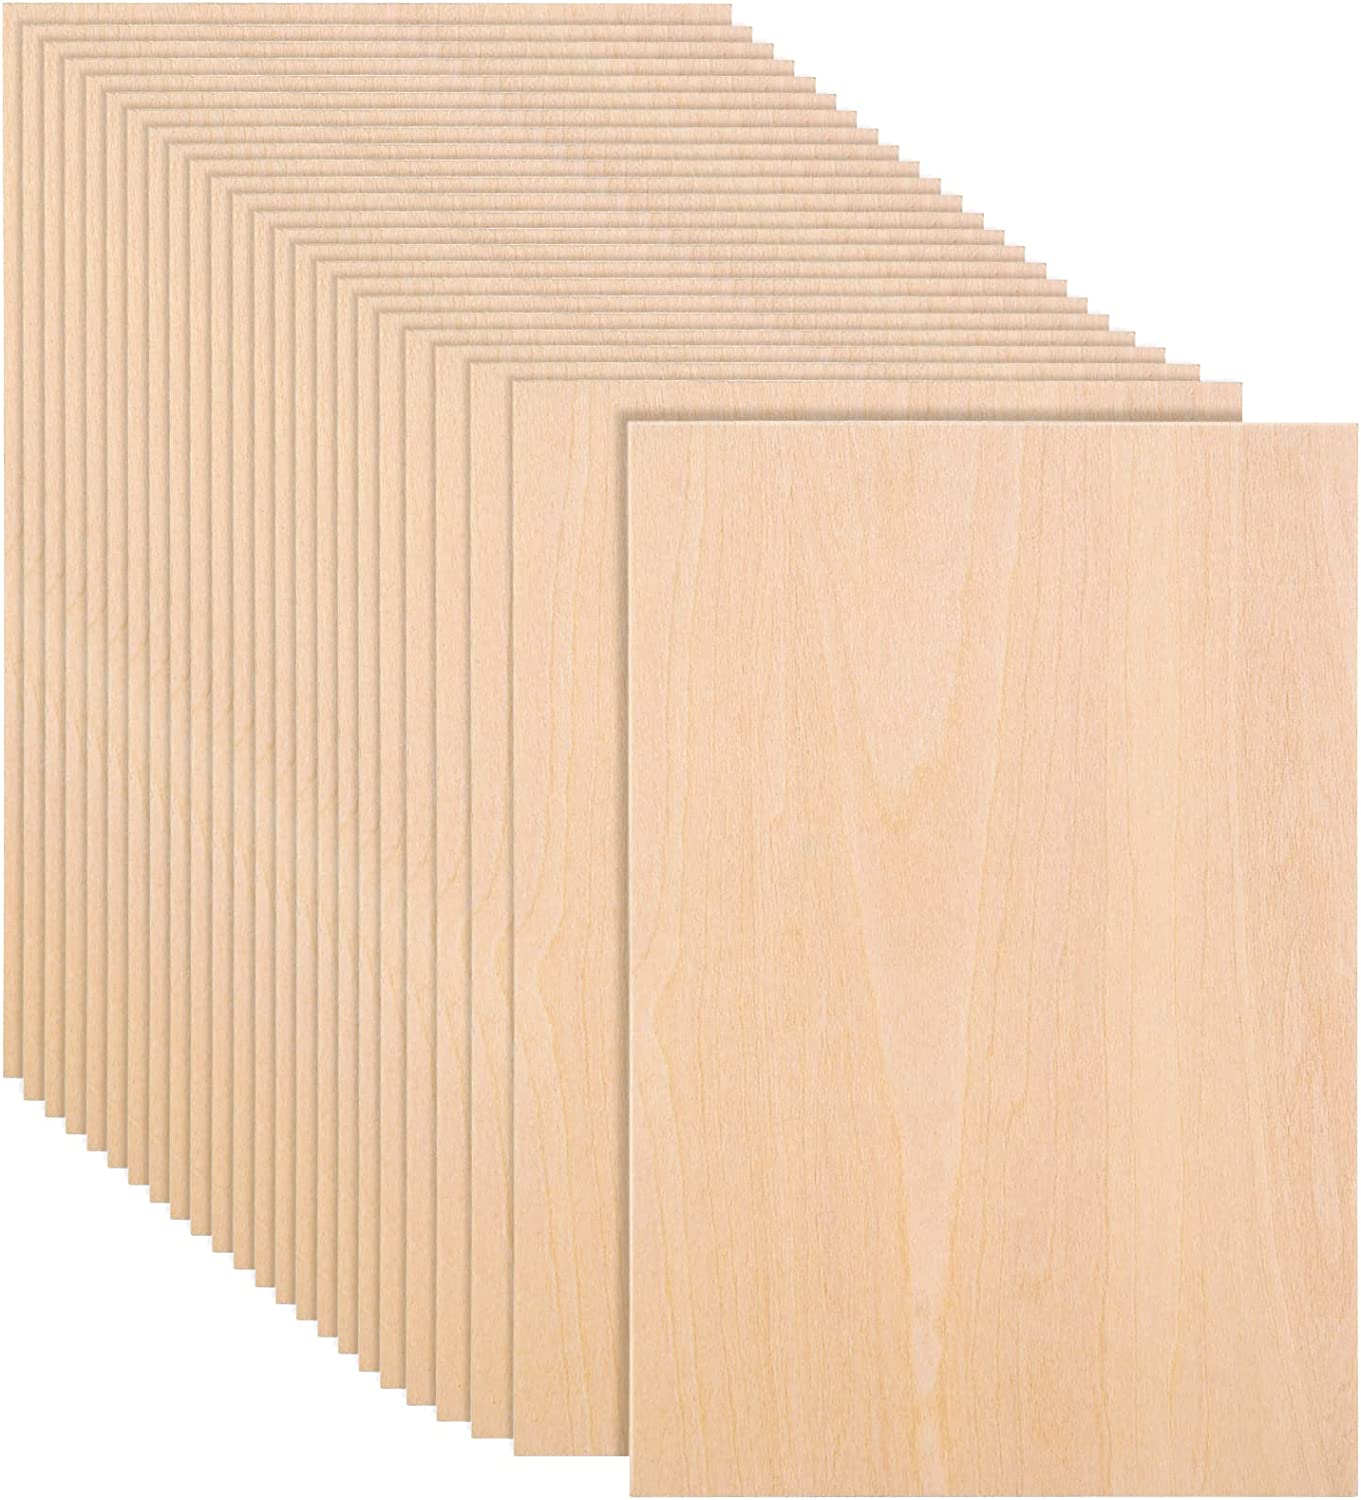 50 Pcs Basswood Sheets 8 x 12 Inch 2mm Thick Plywood Thin Wood Sheets  Rectangular Unfinished Basswood Board with Smooth Surfaces for Crafts  Cutting